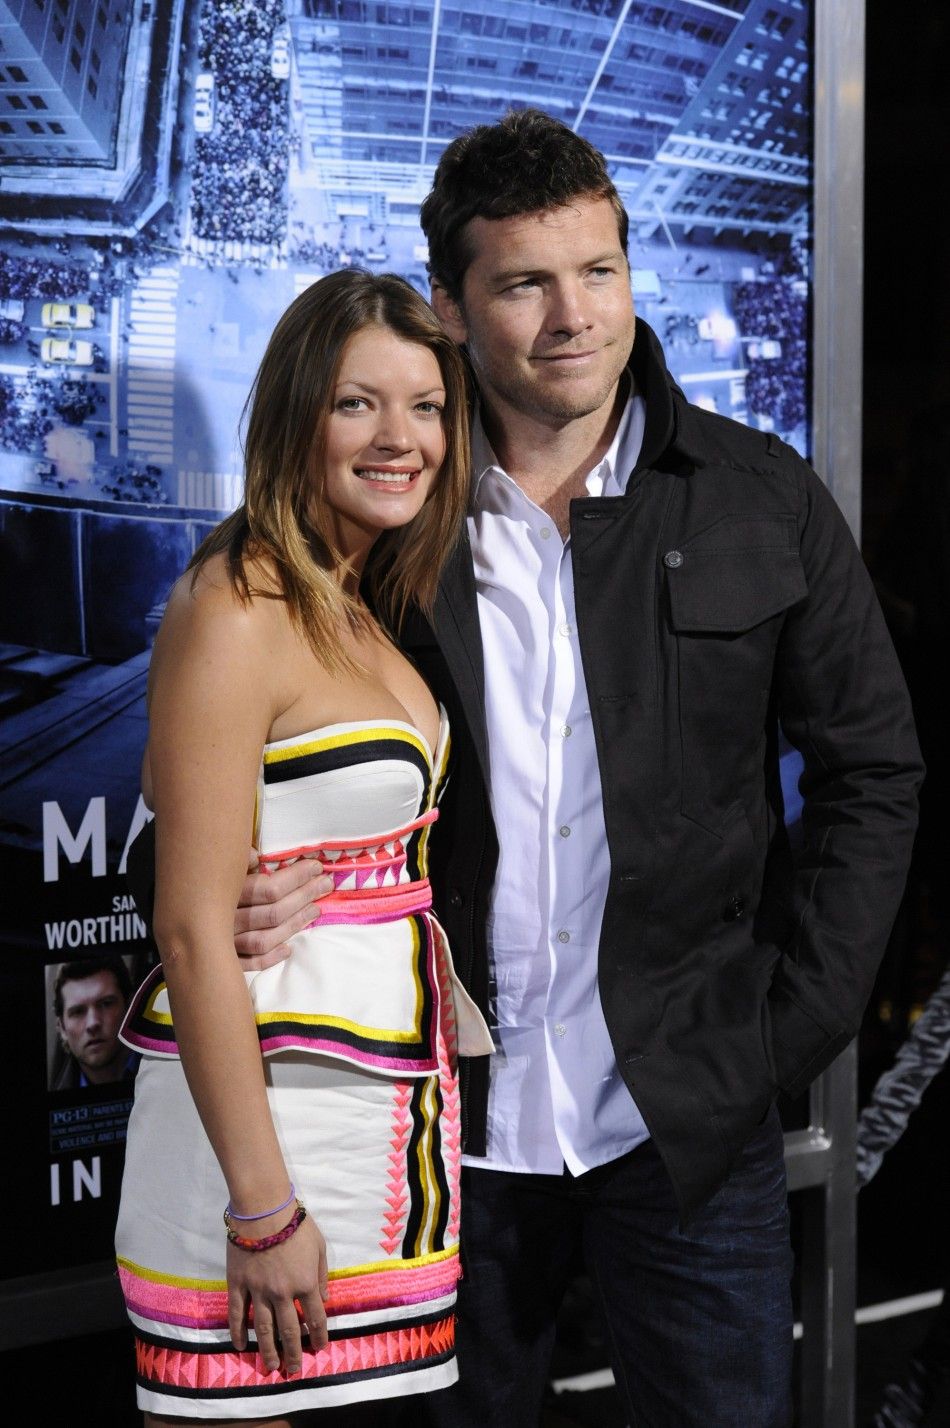 Cast member Sam Worthington R and guest Crystal Humphries attend the premiere of the film quotMan on a Ledgequot in Los Angeles